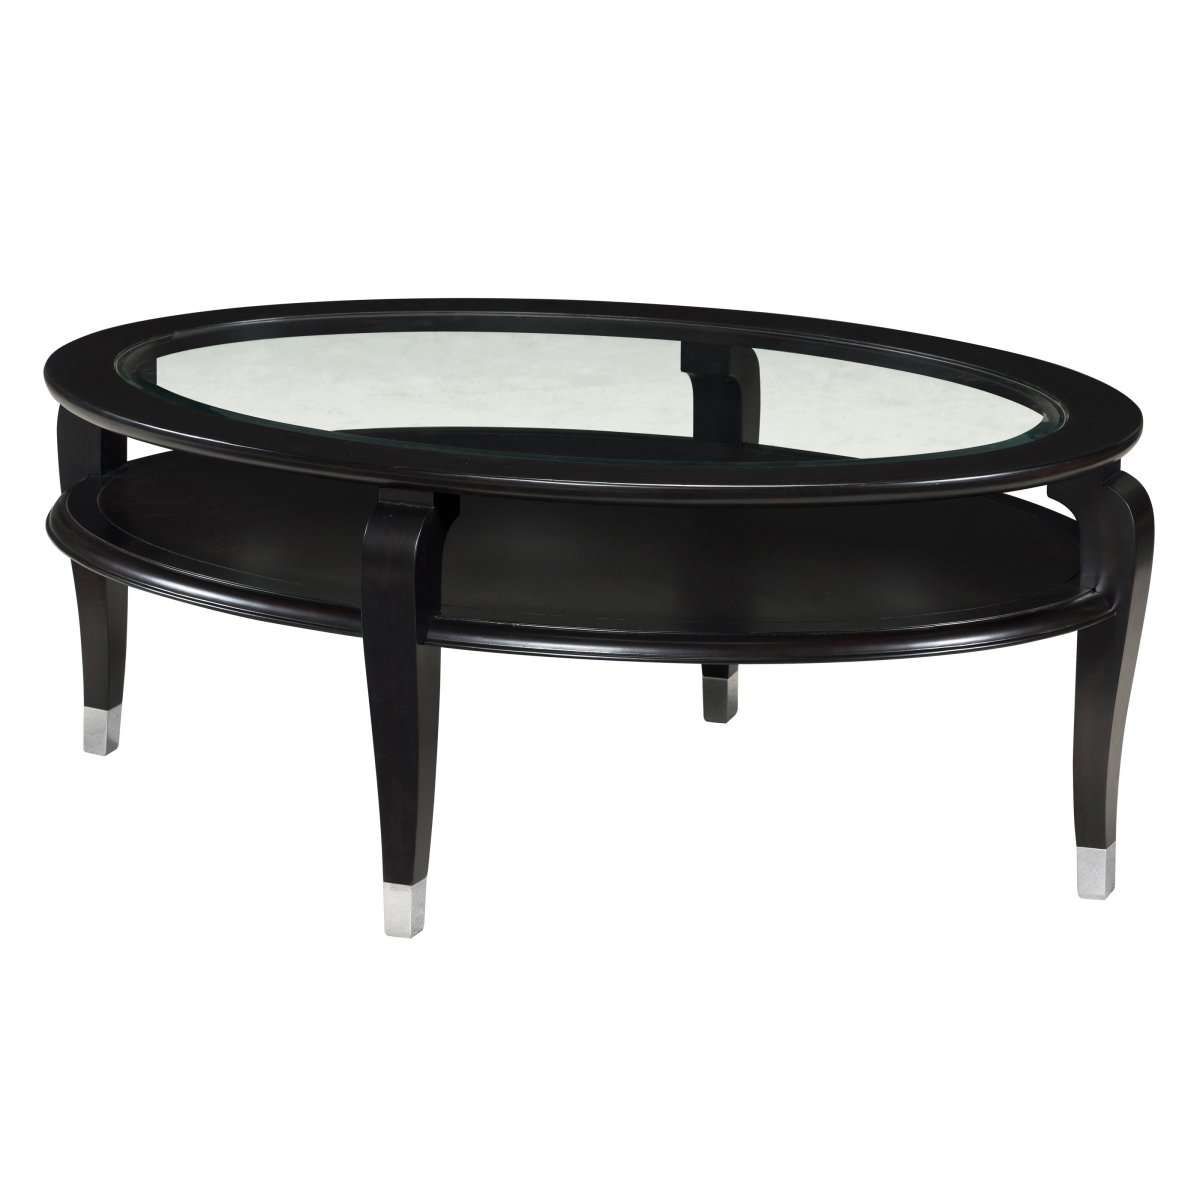 Widely Used Oval Shaped Coffee Tables With Regard To Coffee Tables Ideas: Awesome Black Oval Coffee Table Set Oval Wood (View 17 of 20)